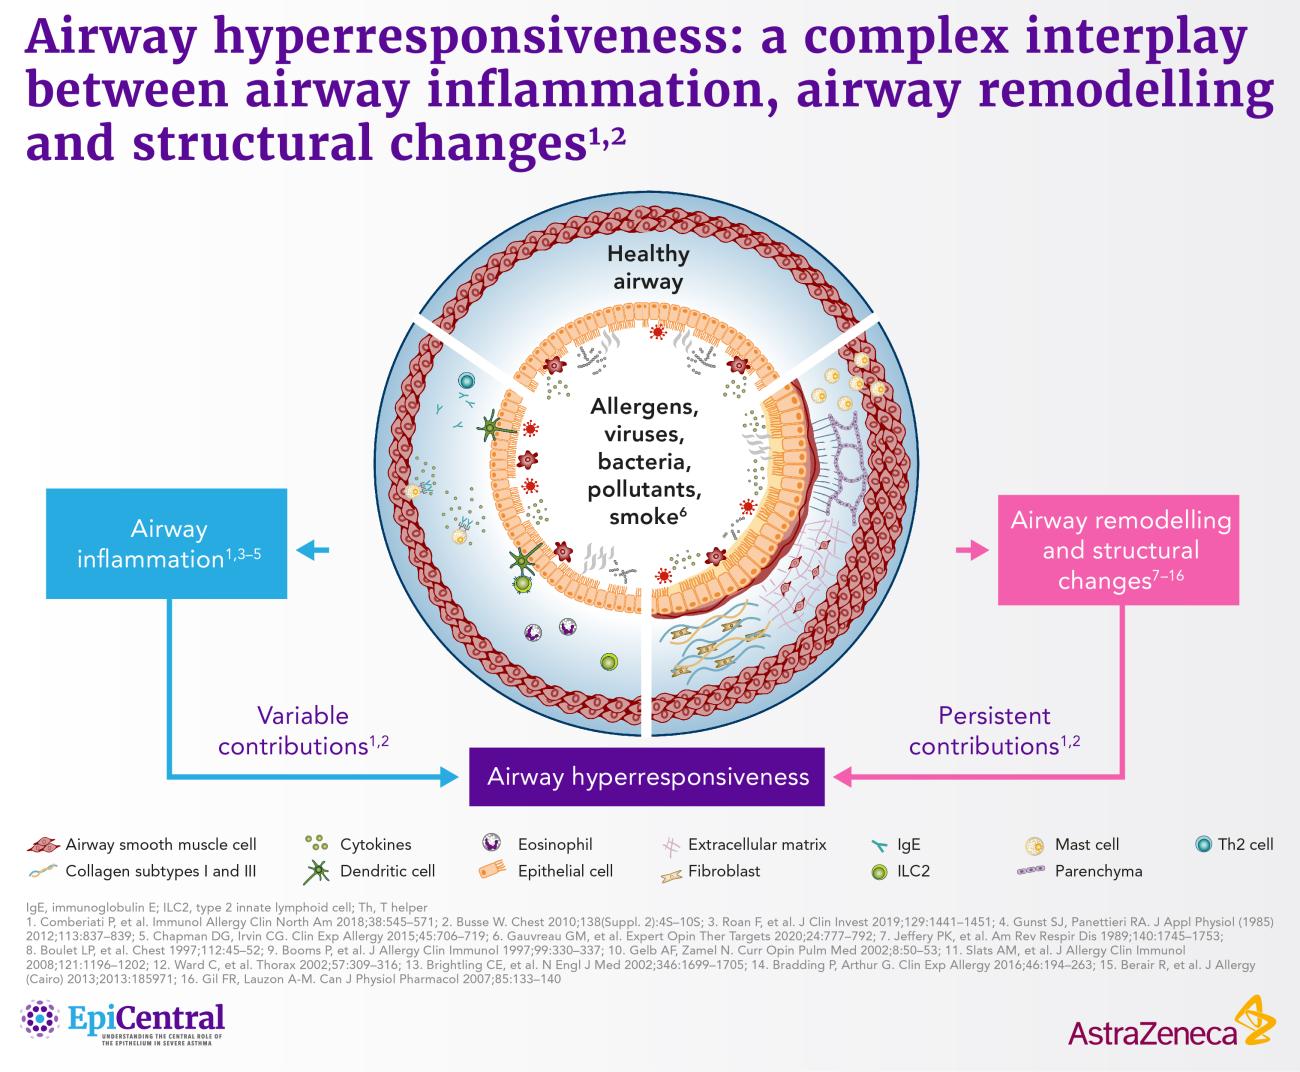 Airway hyperresponsiveness: a complex interplay between airway inflammation, airway remodelling and structural changes